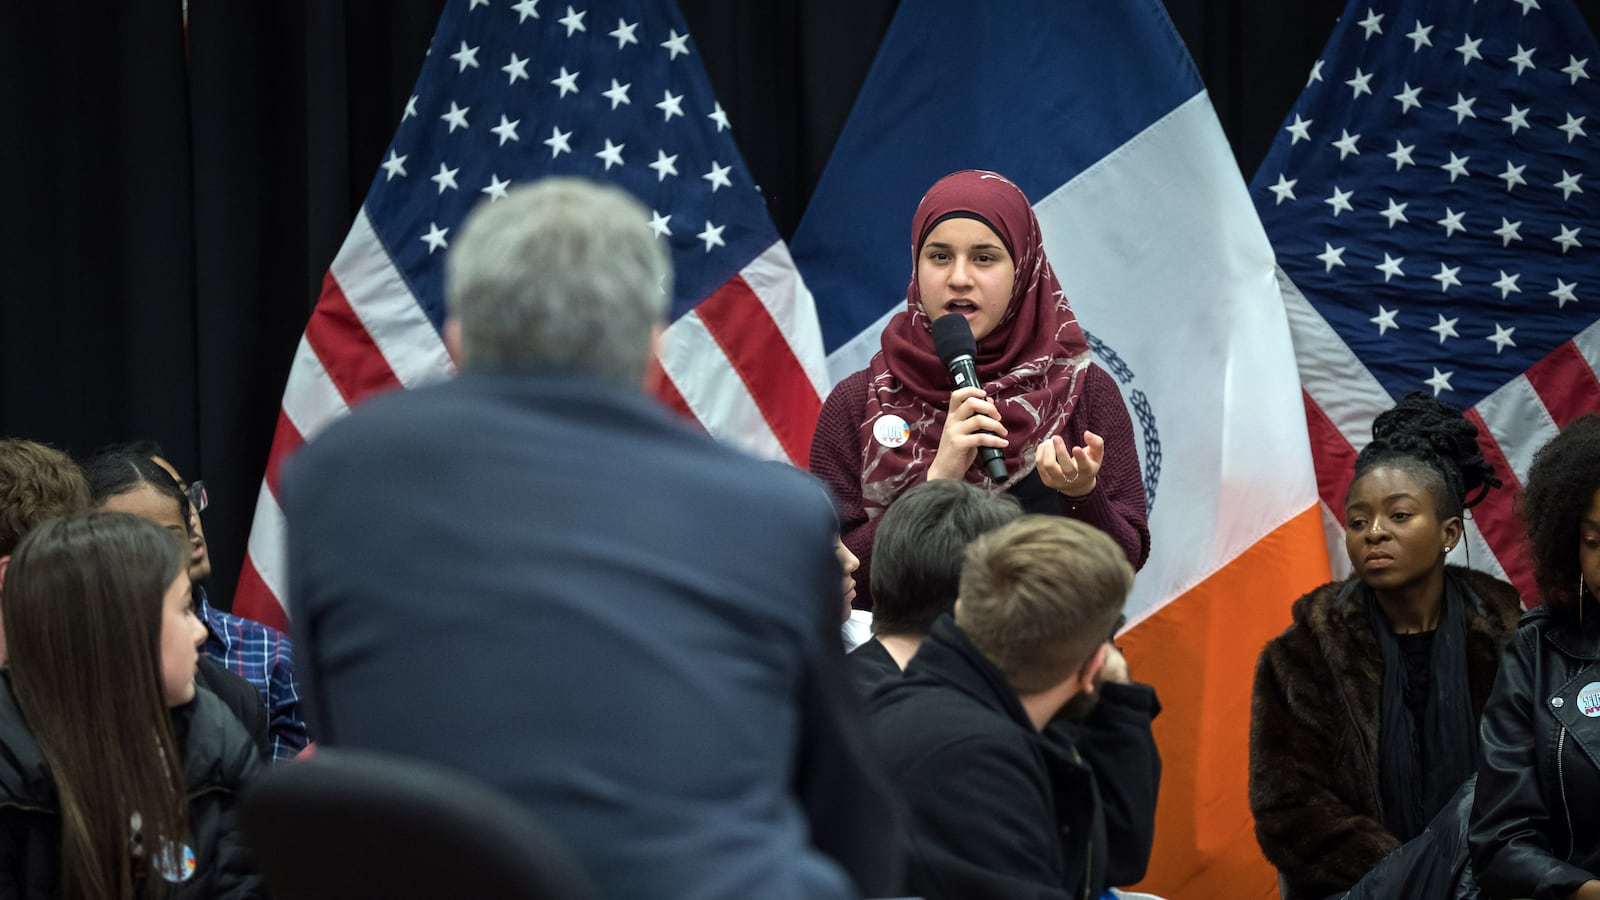 A student asks Mayor de Blasio a question during Thursday's town hall meeting about school safety.